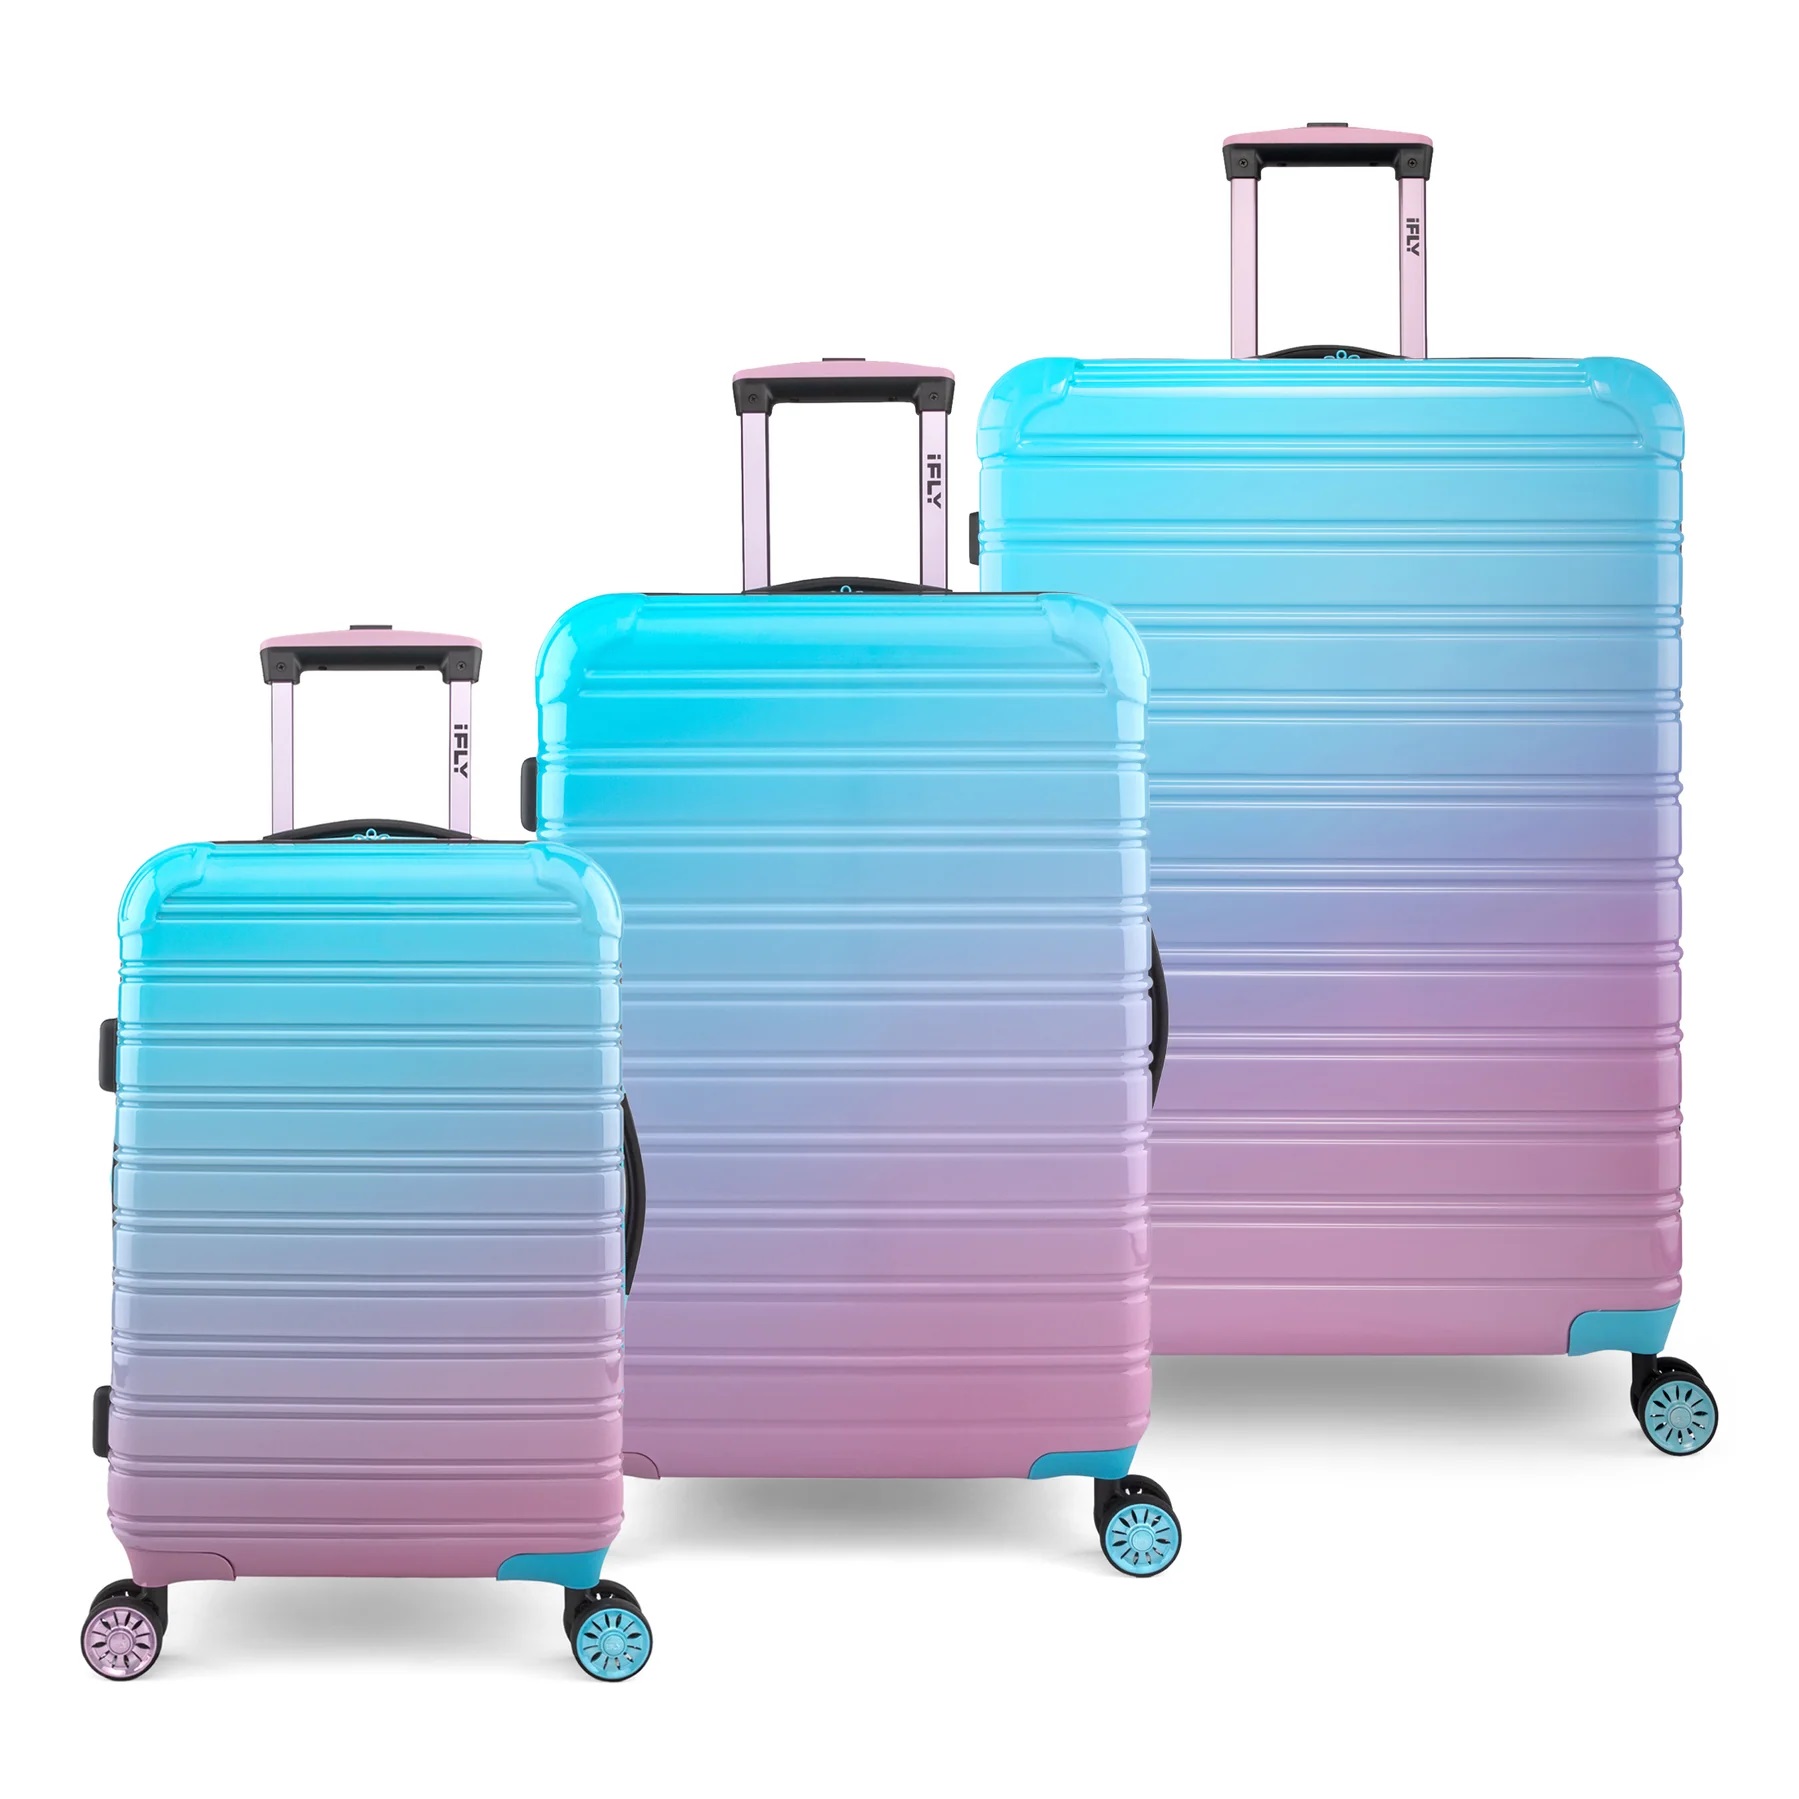 VALI DU LỊCH IFLY FIBERTECH OMBRE HARDSIDE LUGGAGE IN COTTON CANDY 4